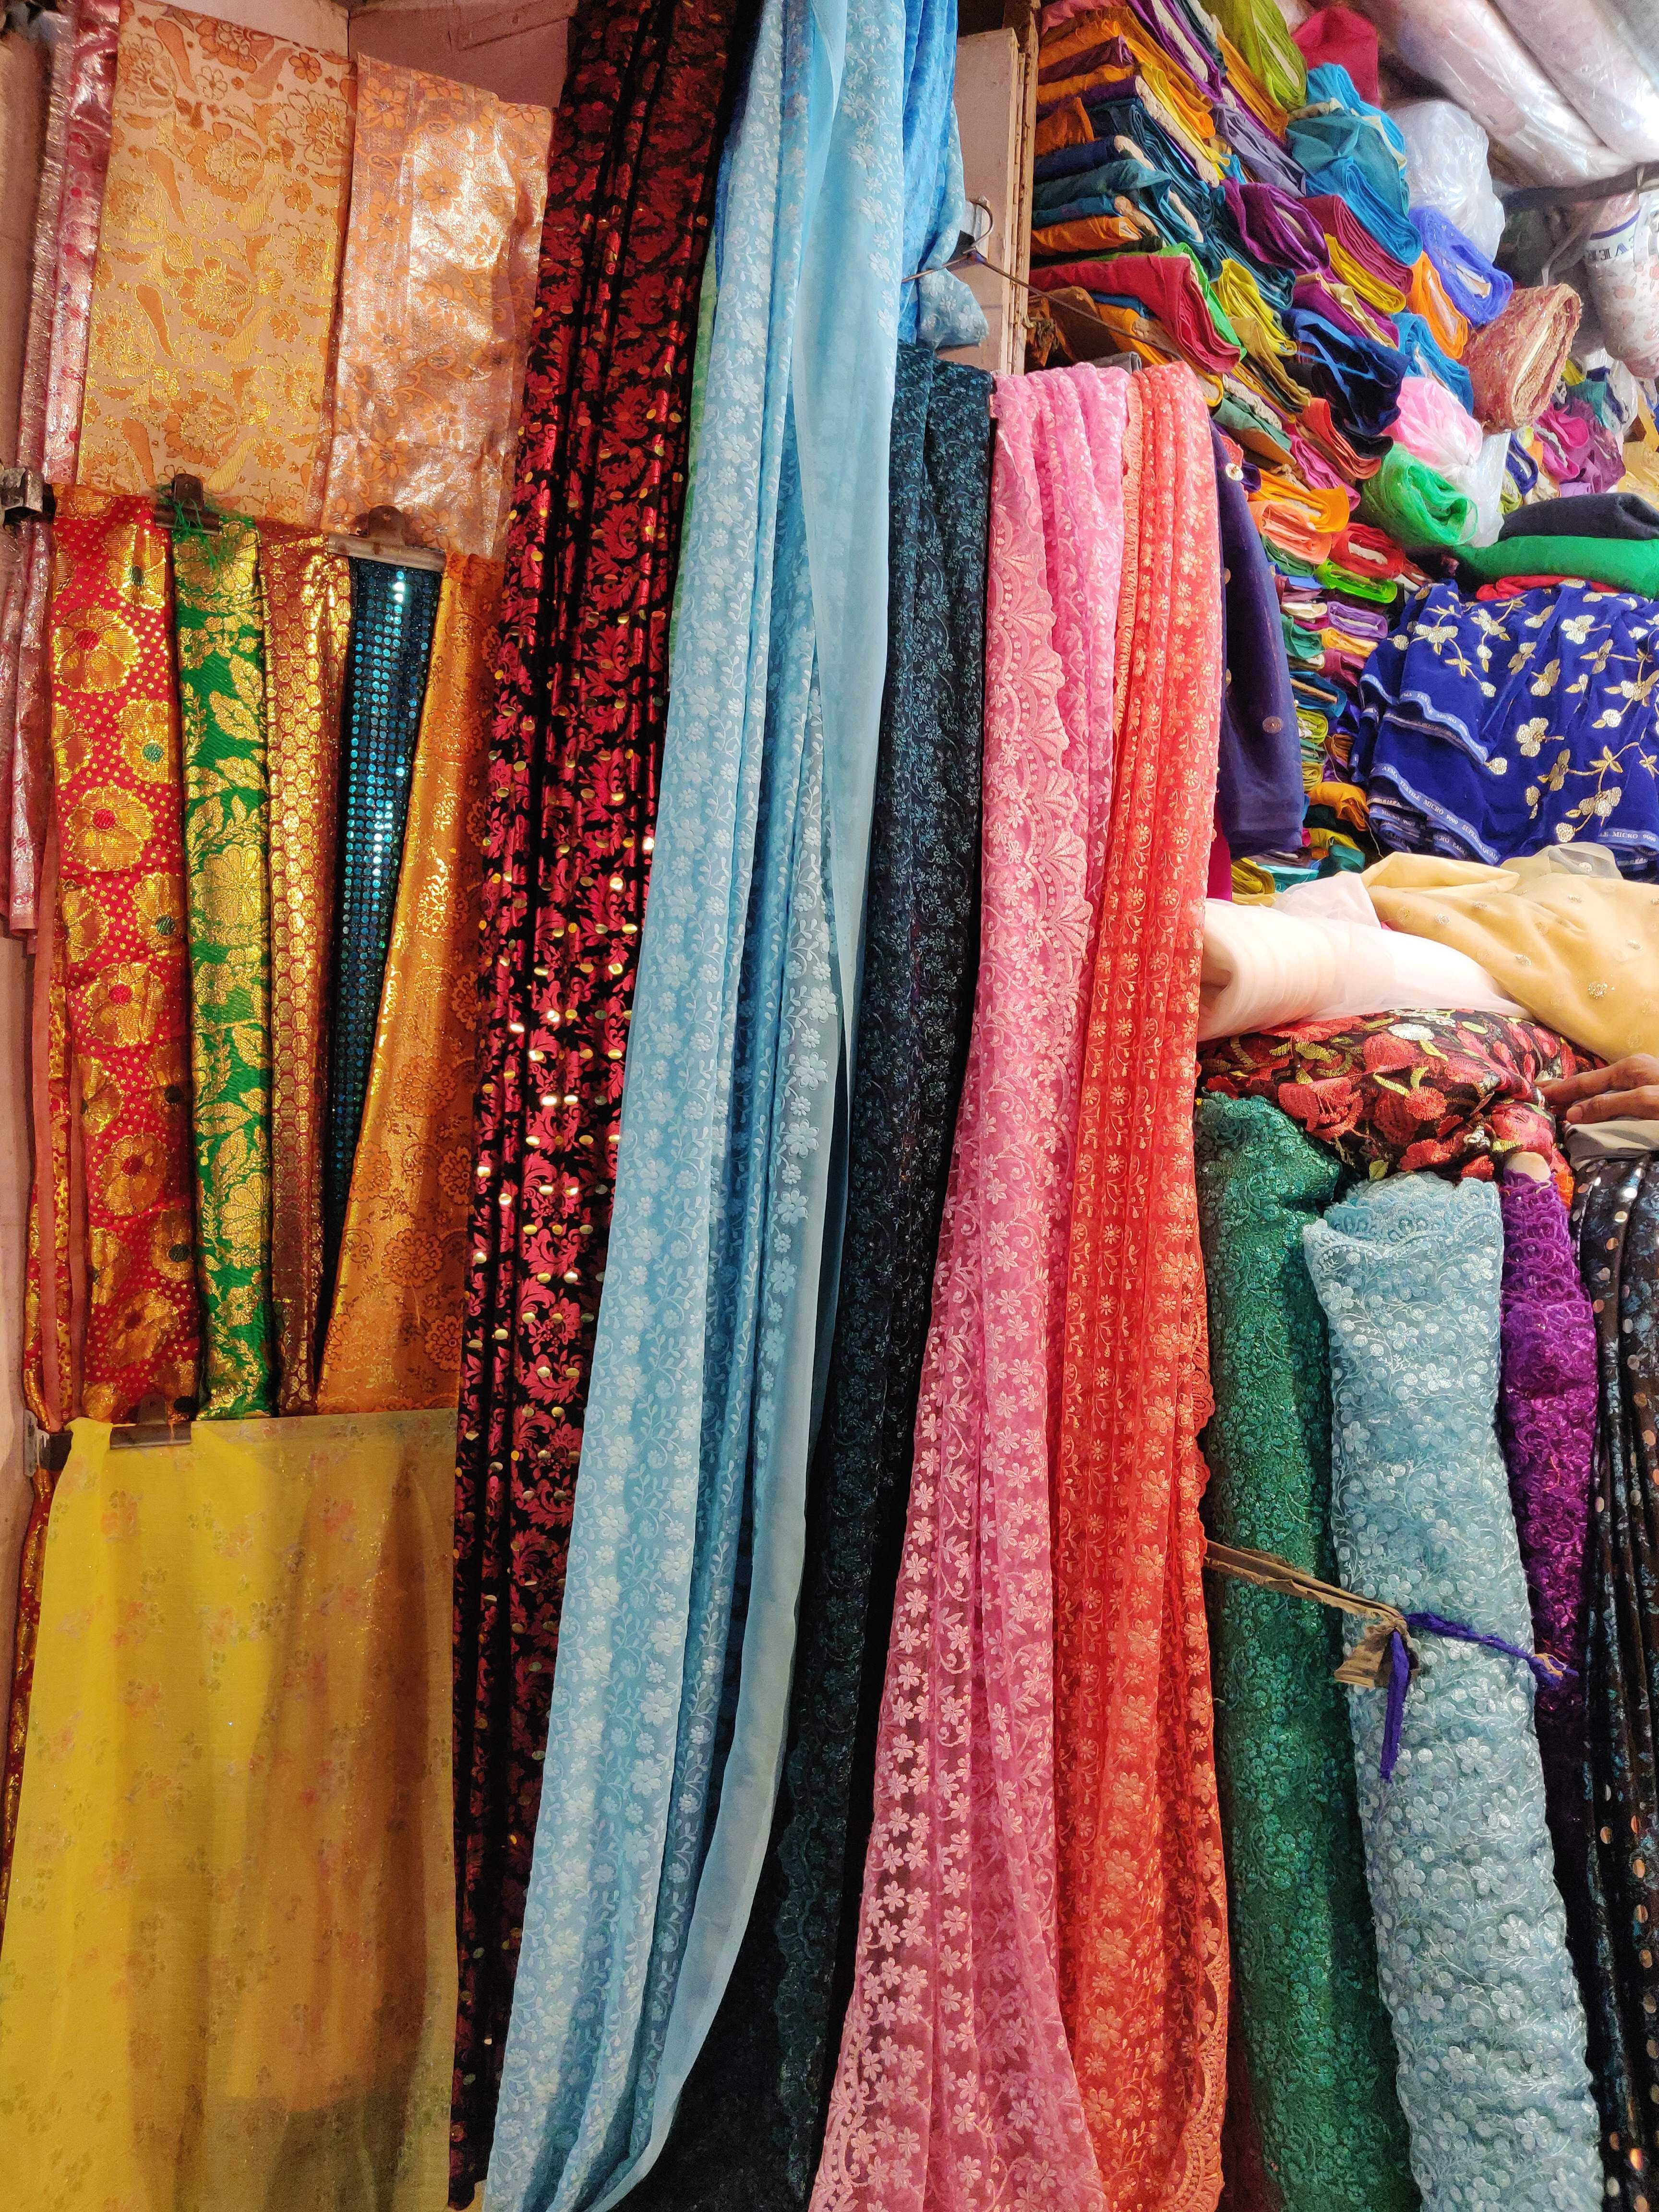 Wholesale Dress Material Market In Tirupur Pin | International Society of  Precision Agriculture